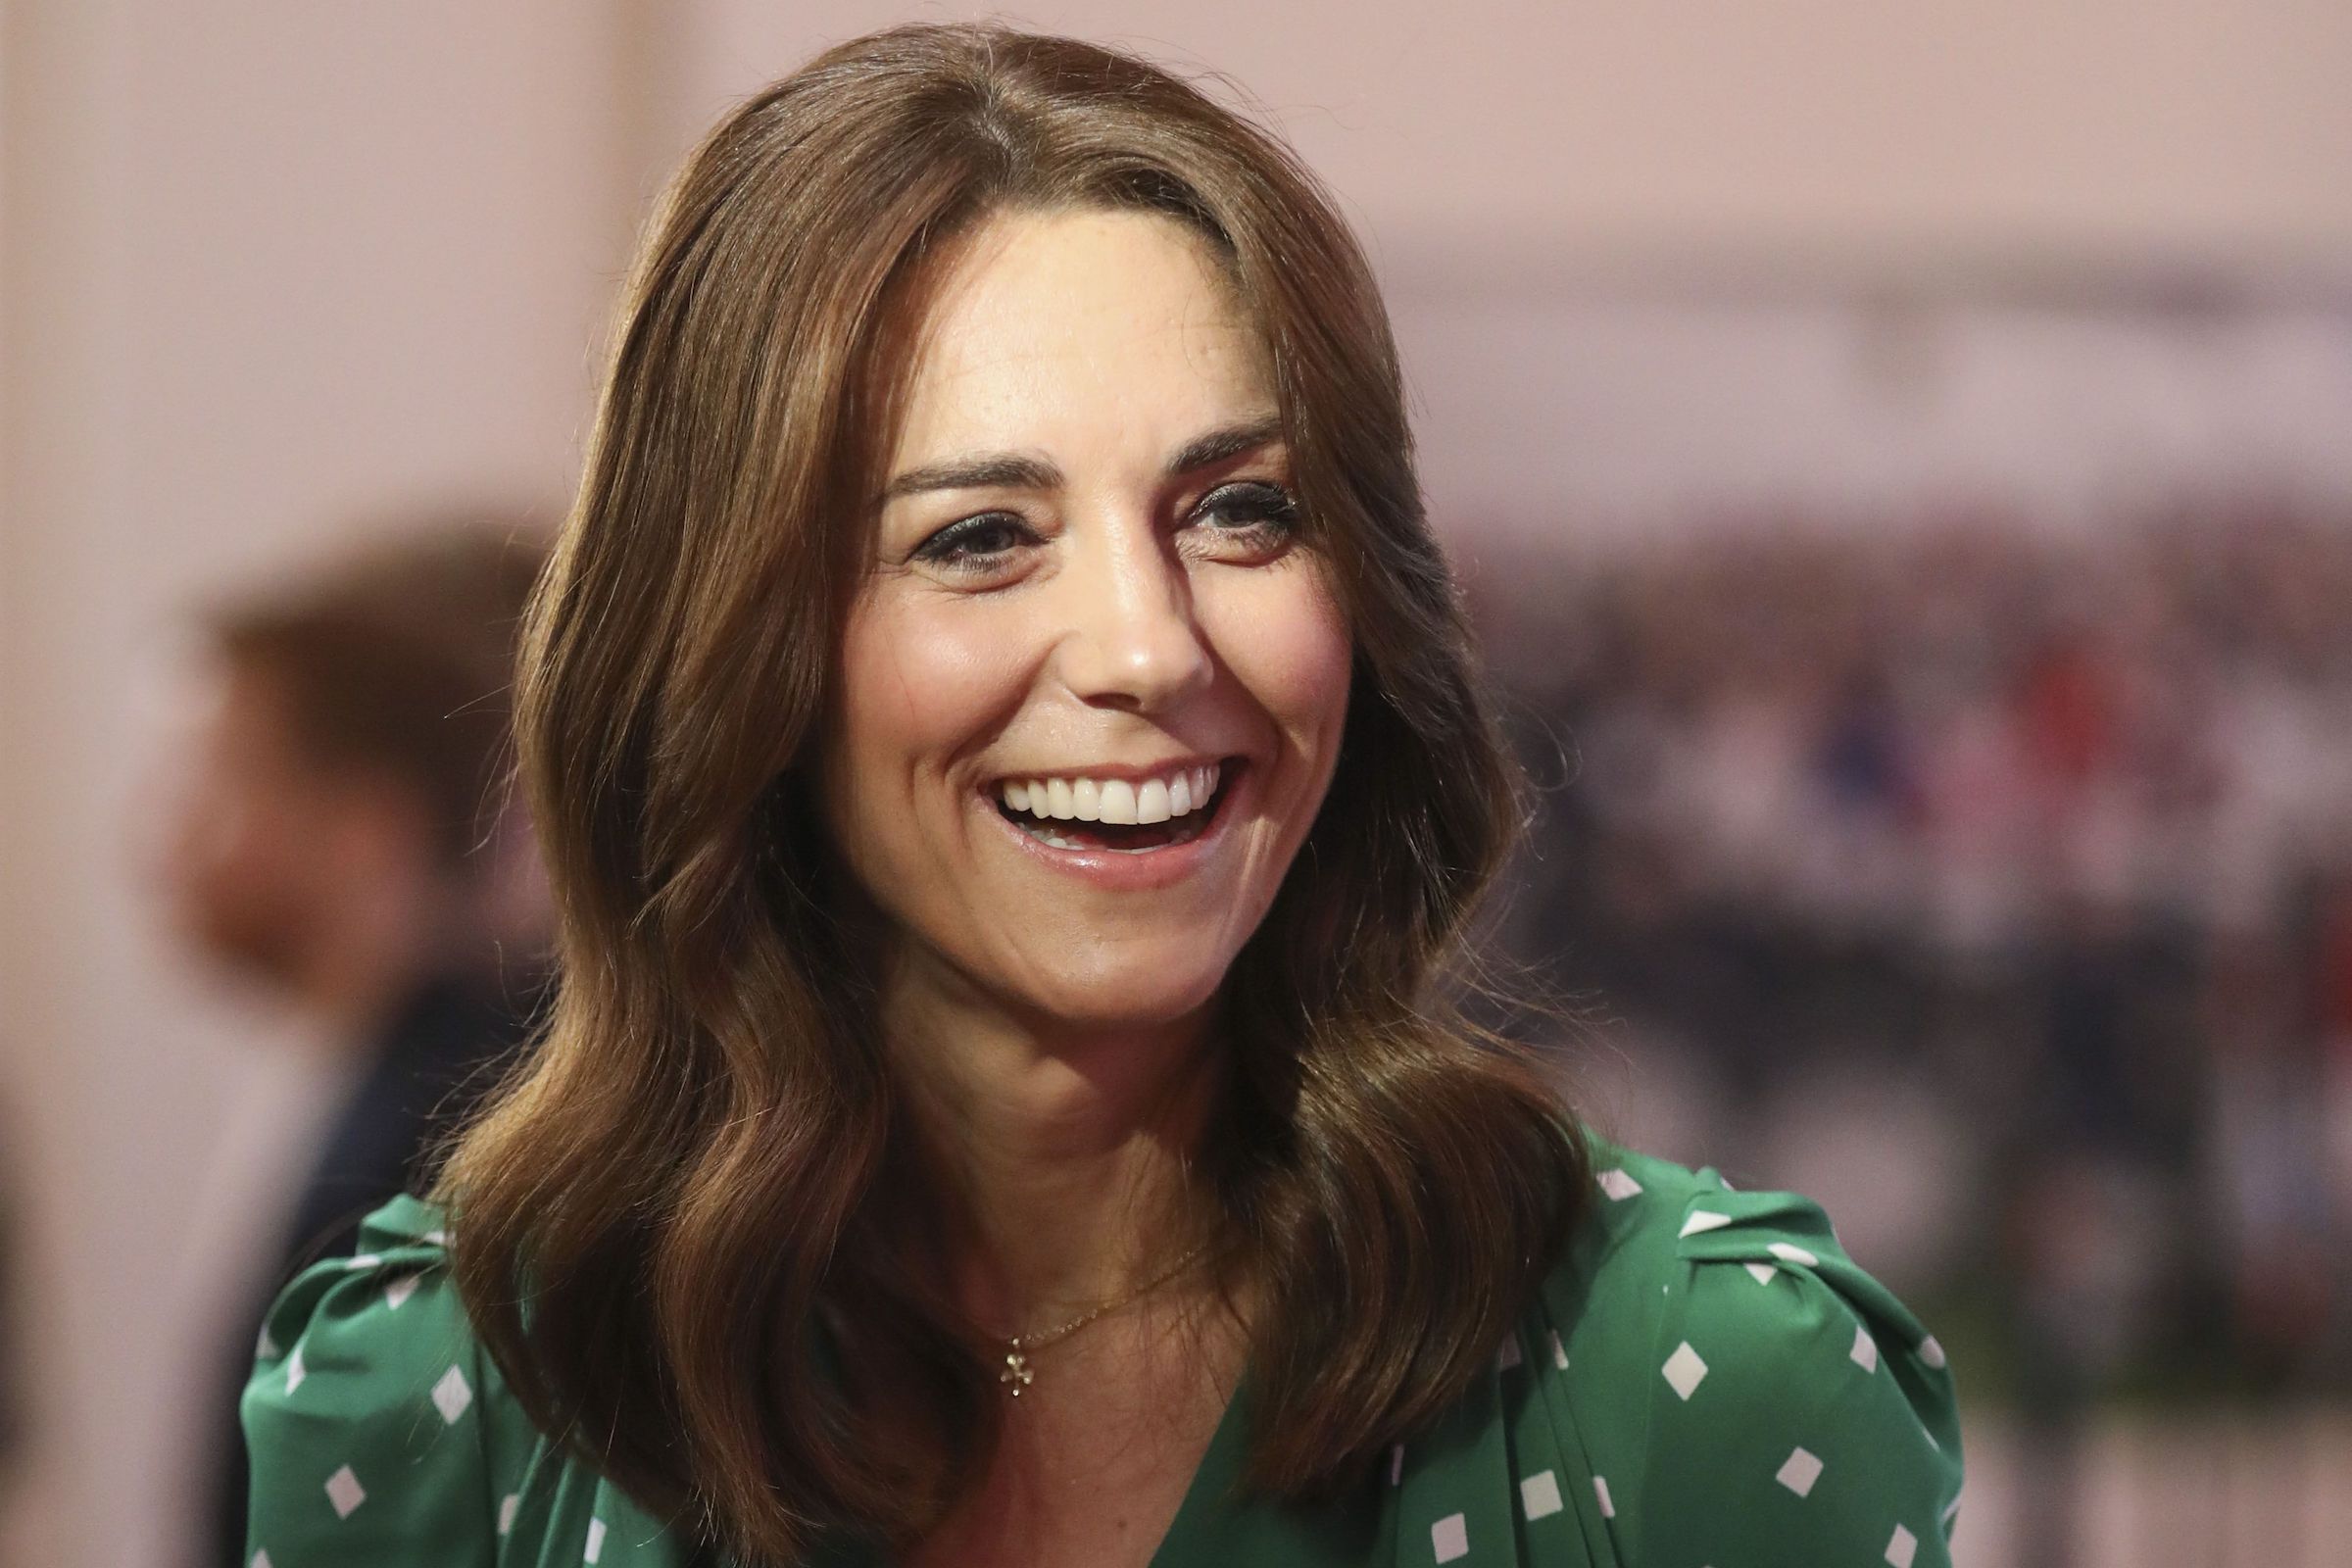 Royal baby or regal rumor? Uncover the clues and cut through the noble noise in our deep dive into the question on every royal watcher's lips: Is Kate Middleton actually pregnant?